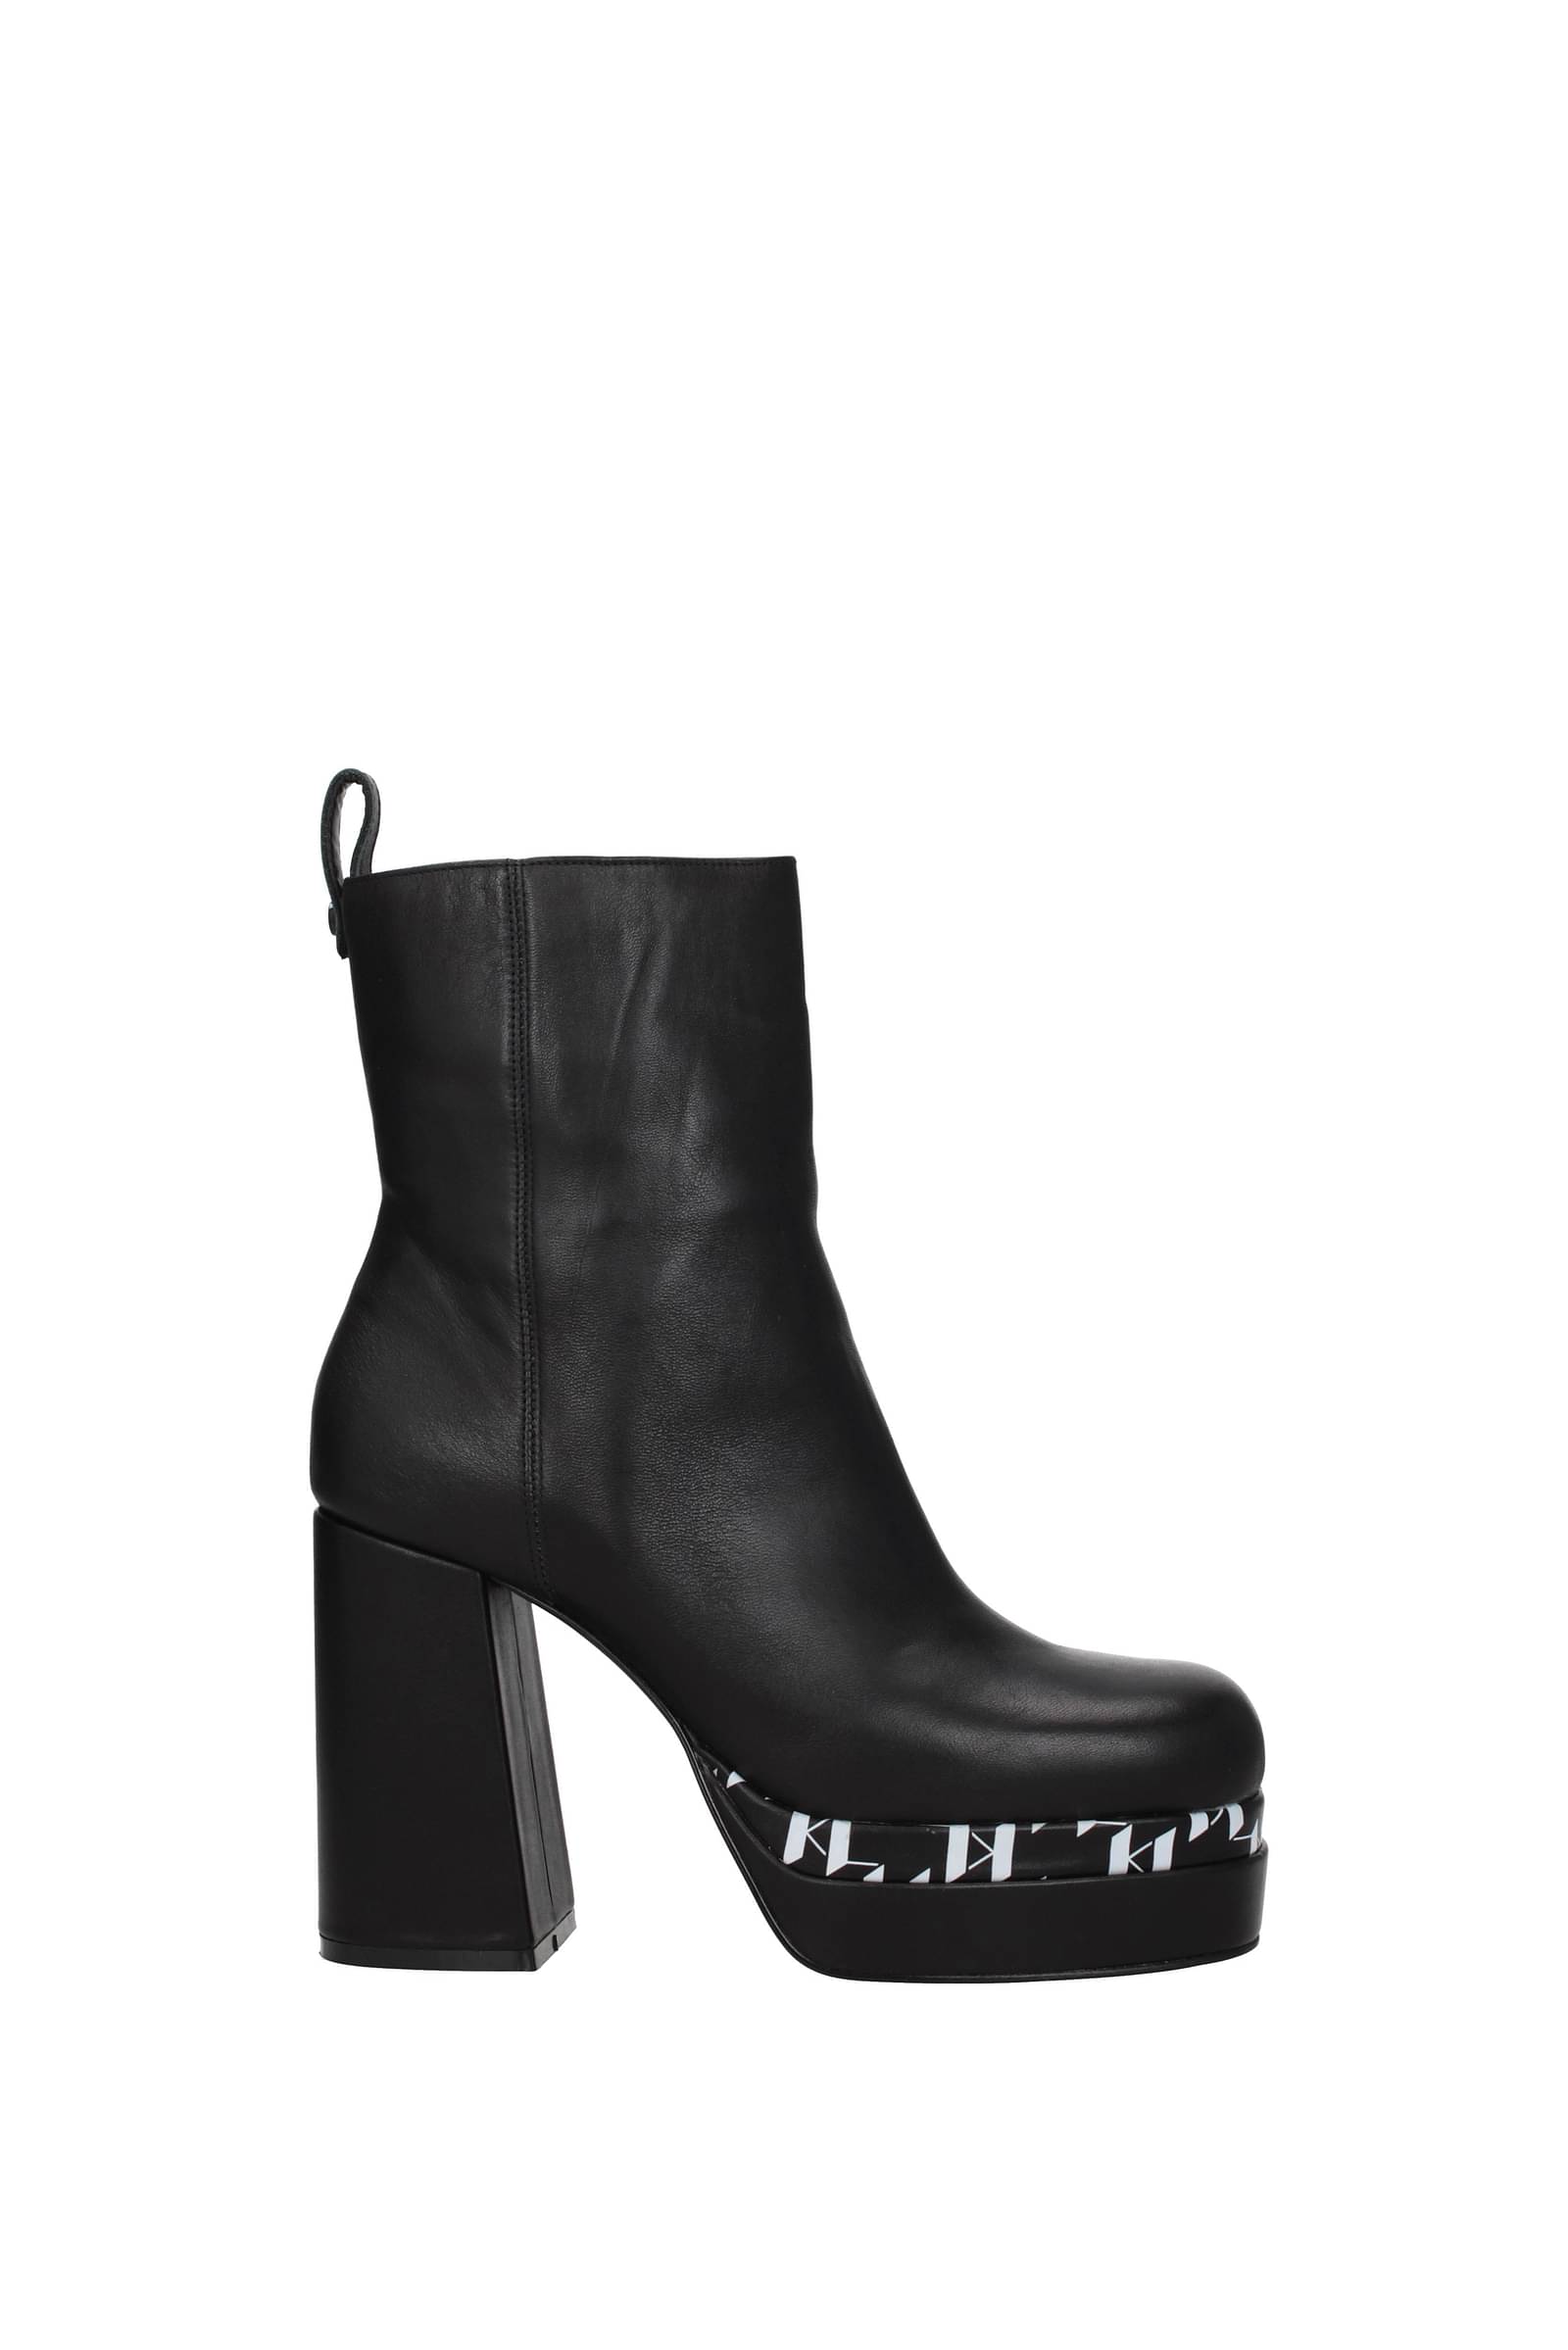 2019 Womens Stripper Black Heeled Ankle Boots Chunky 16cm/7cm High Heels,  Short Ankle Combat Block Heel, Fetish Warm Plush Winter Snow Shoes From  Mamu23, $34.21 | DHgate.Com